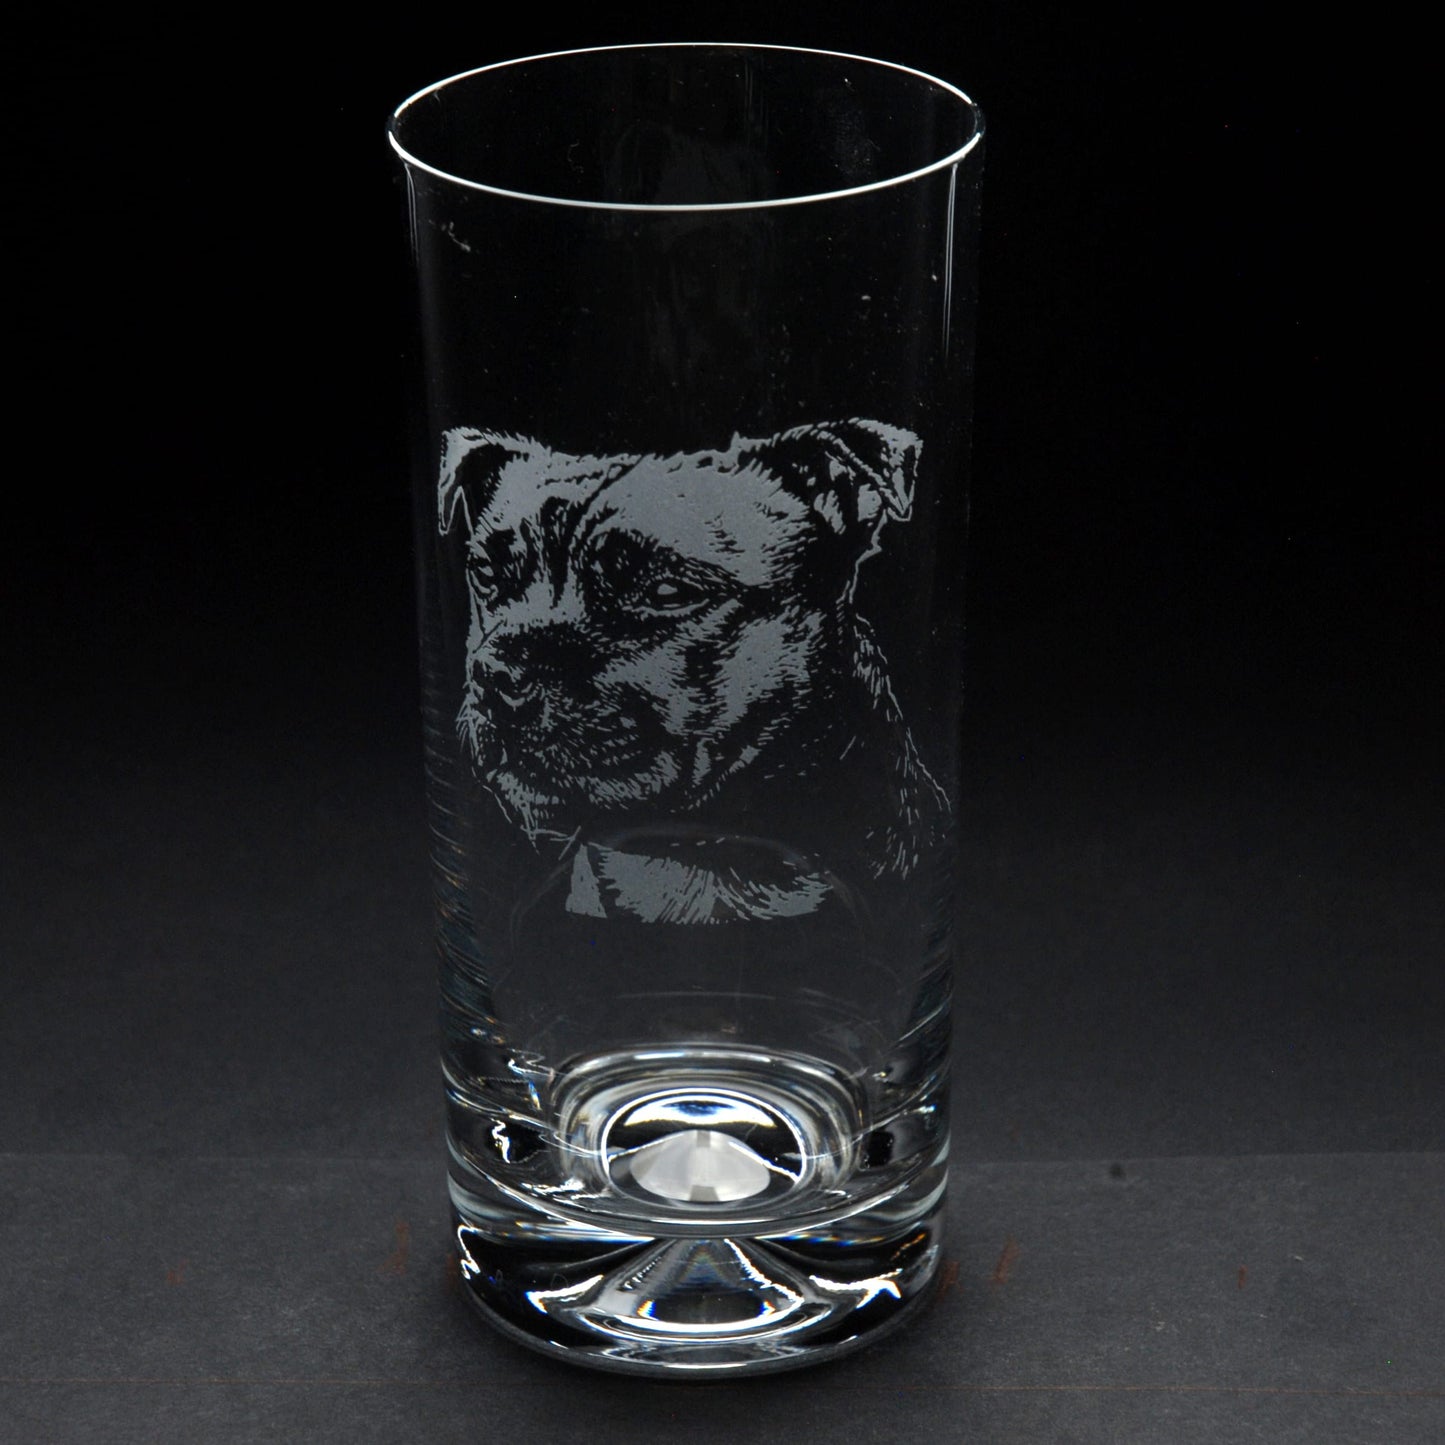 Staffy Dog Head Highball Glass - Hand Etched/Engraved Gift